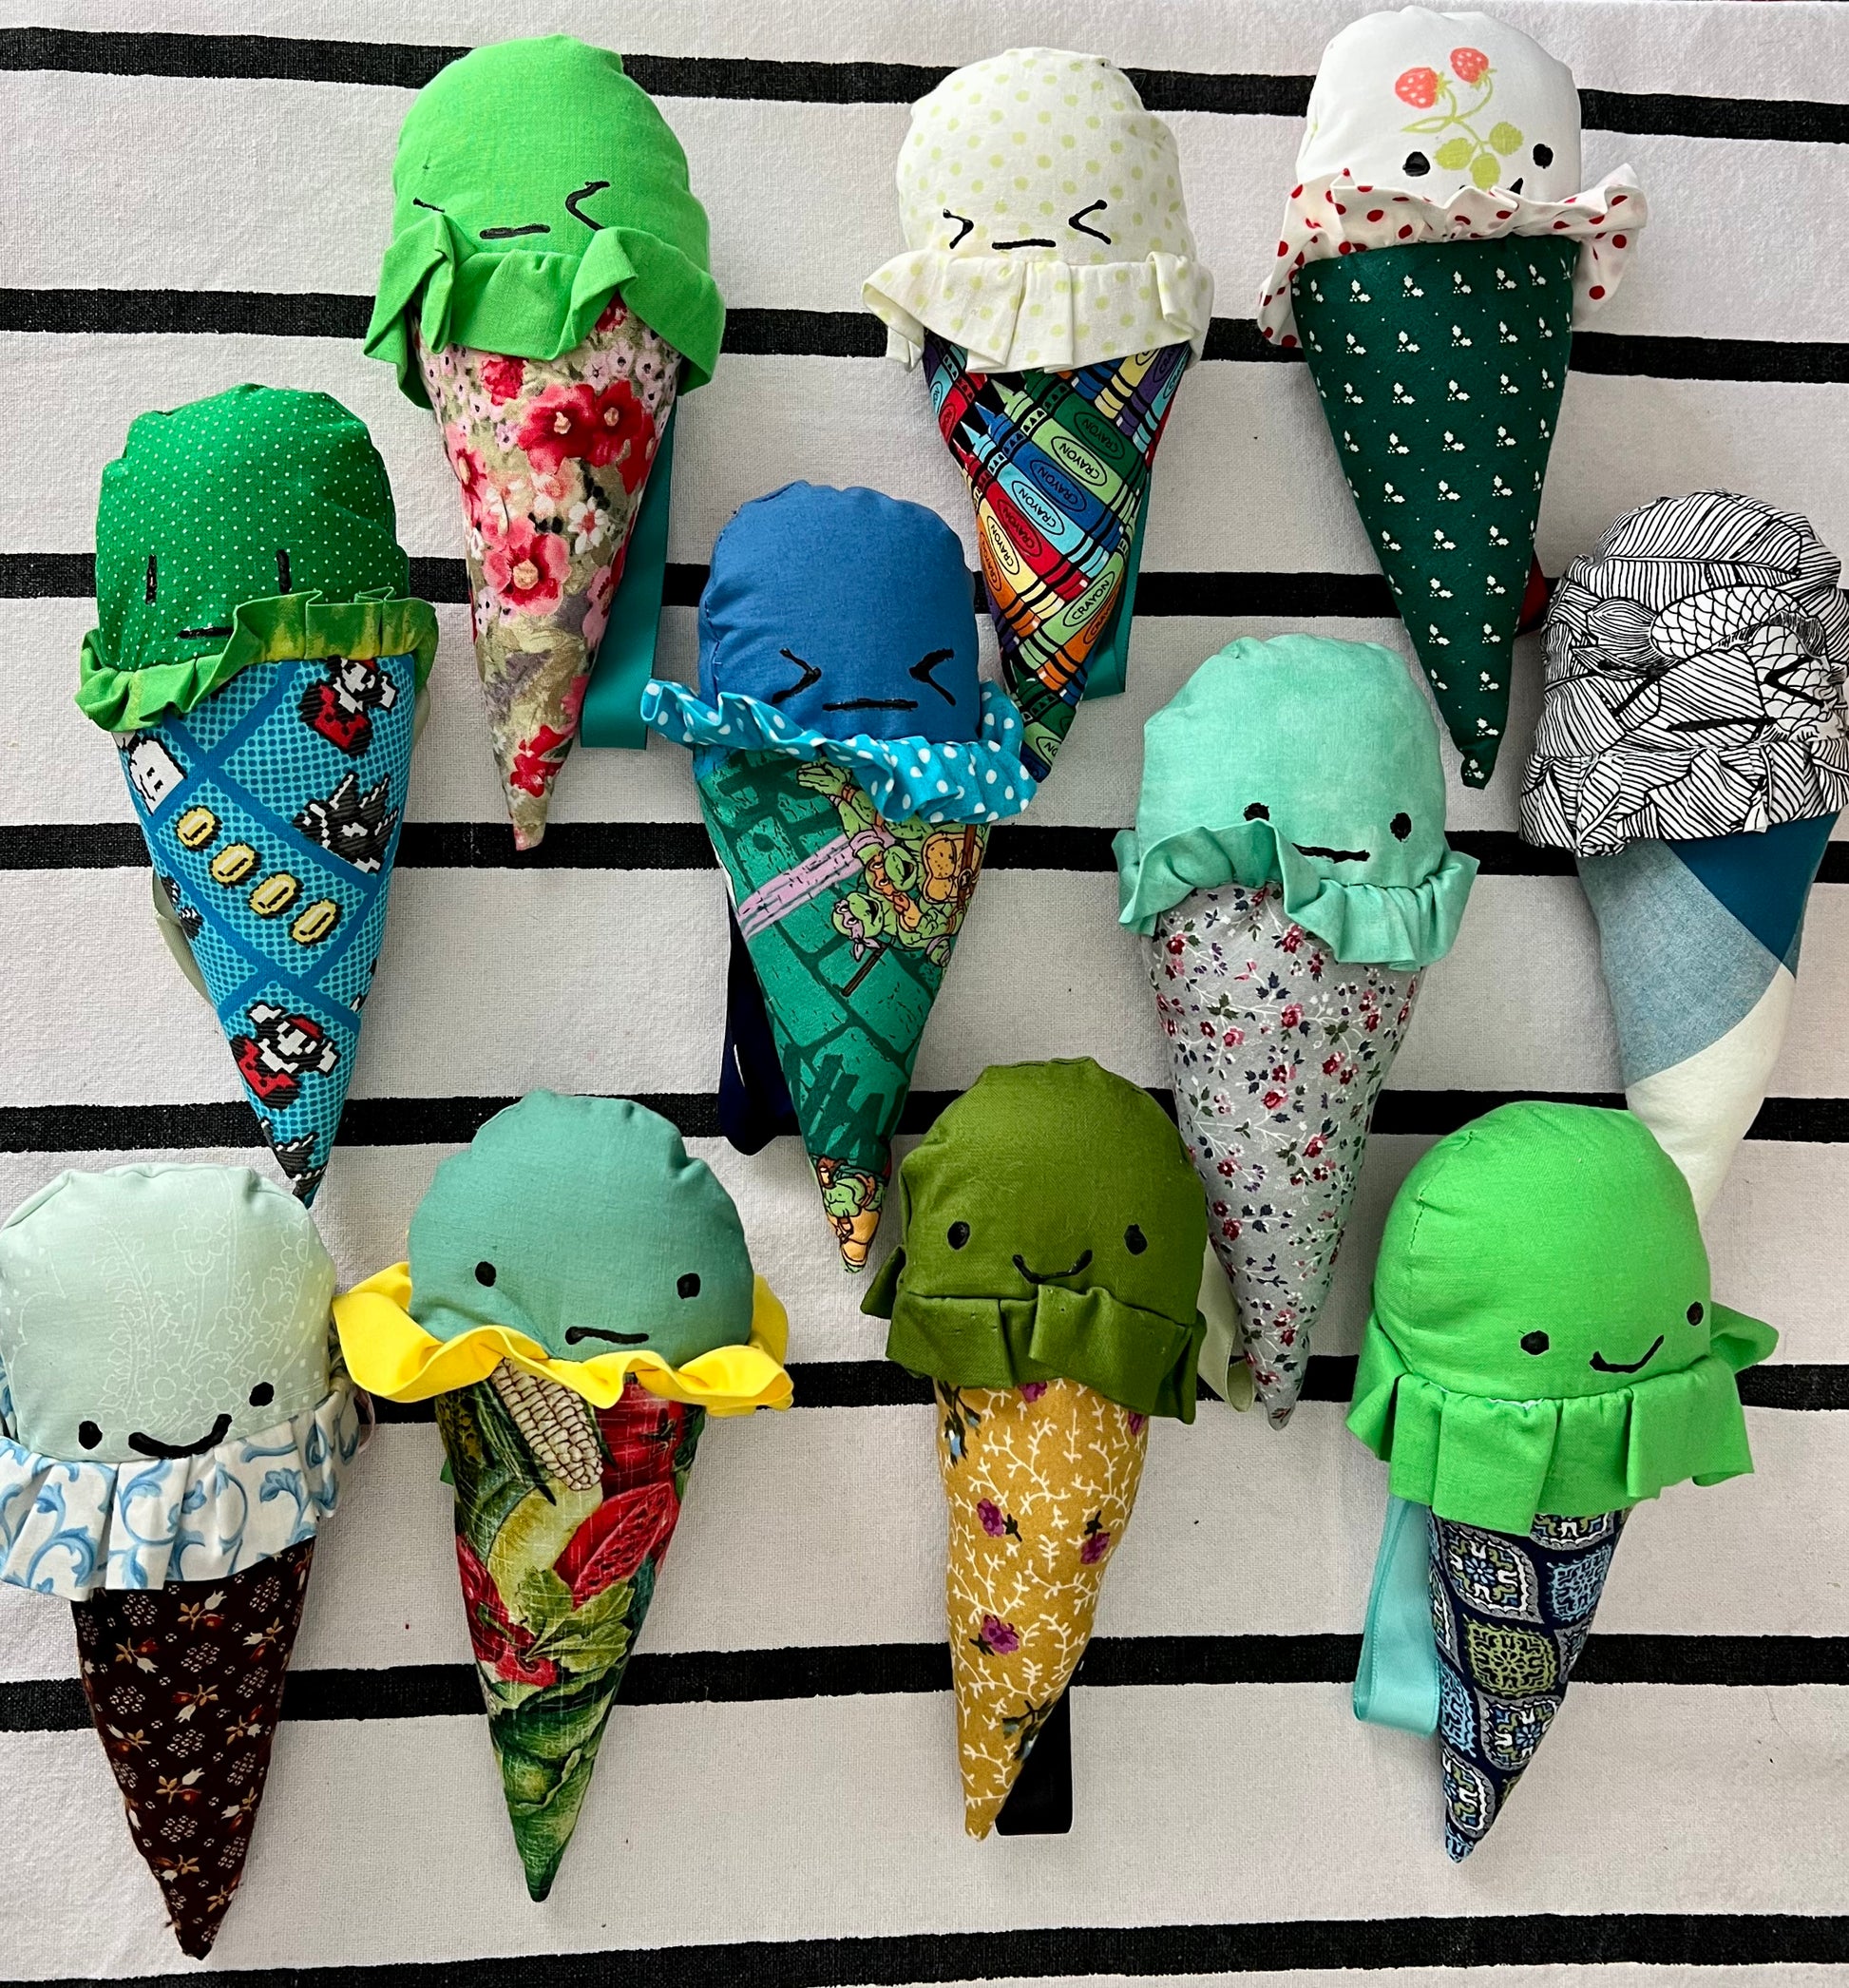 a group of green themed ice crem cones with handpainted faces against a striped background